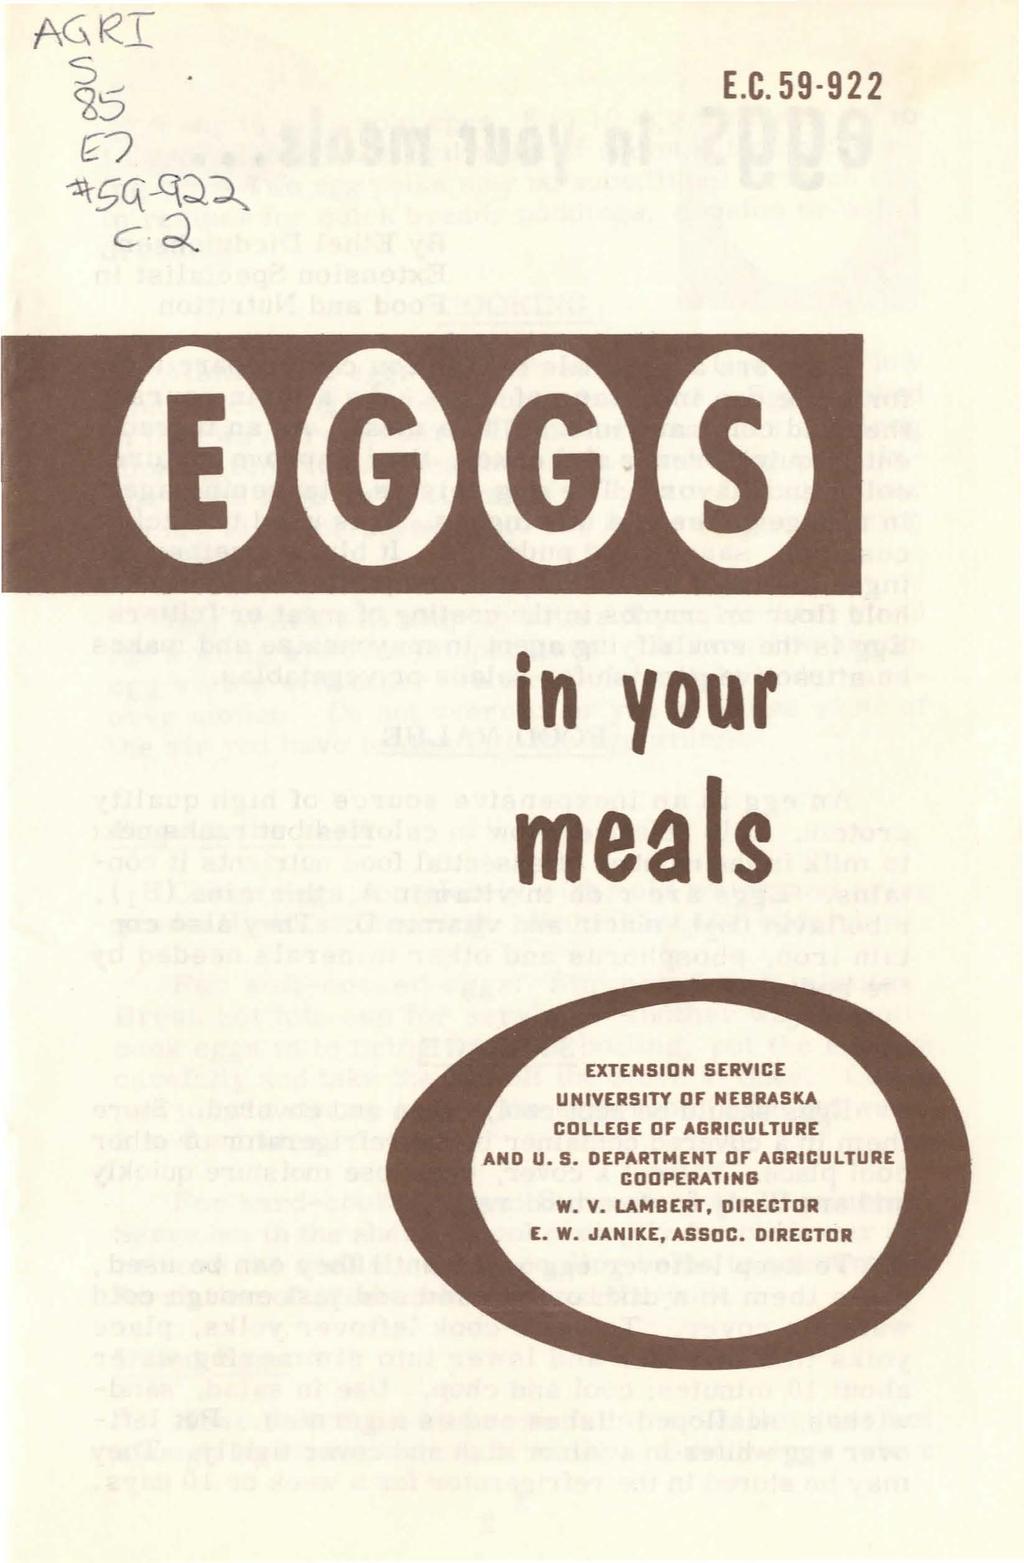 E.C. 59-922 1n your meals EXTENSION SERVICE UNIVERSITY OF NEBRASKA COLLEGE OF AGRICULTURE AND